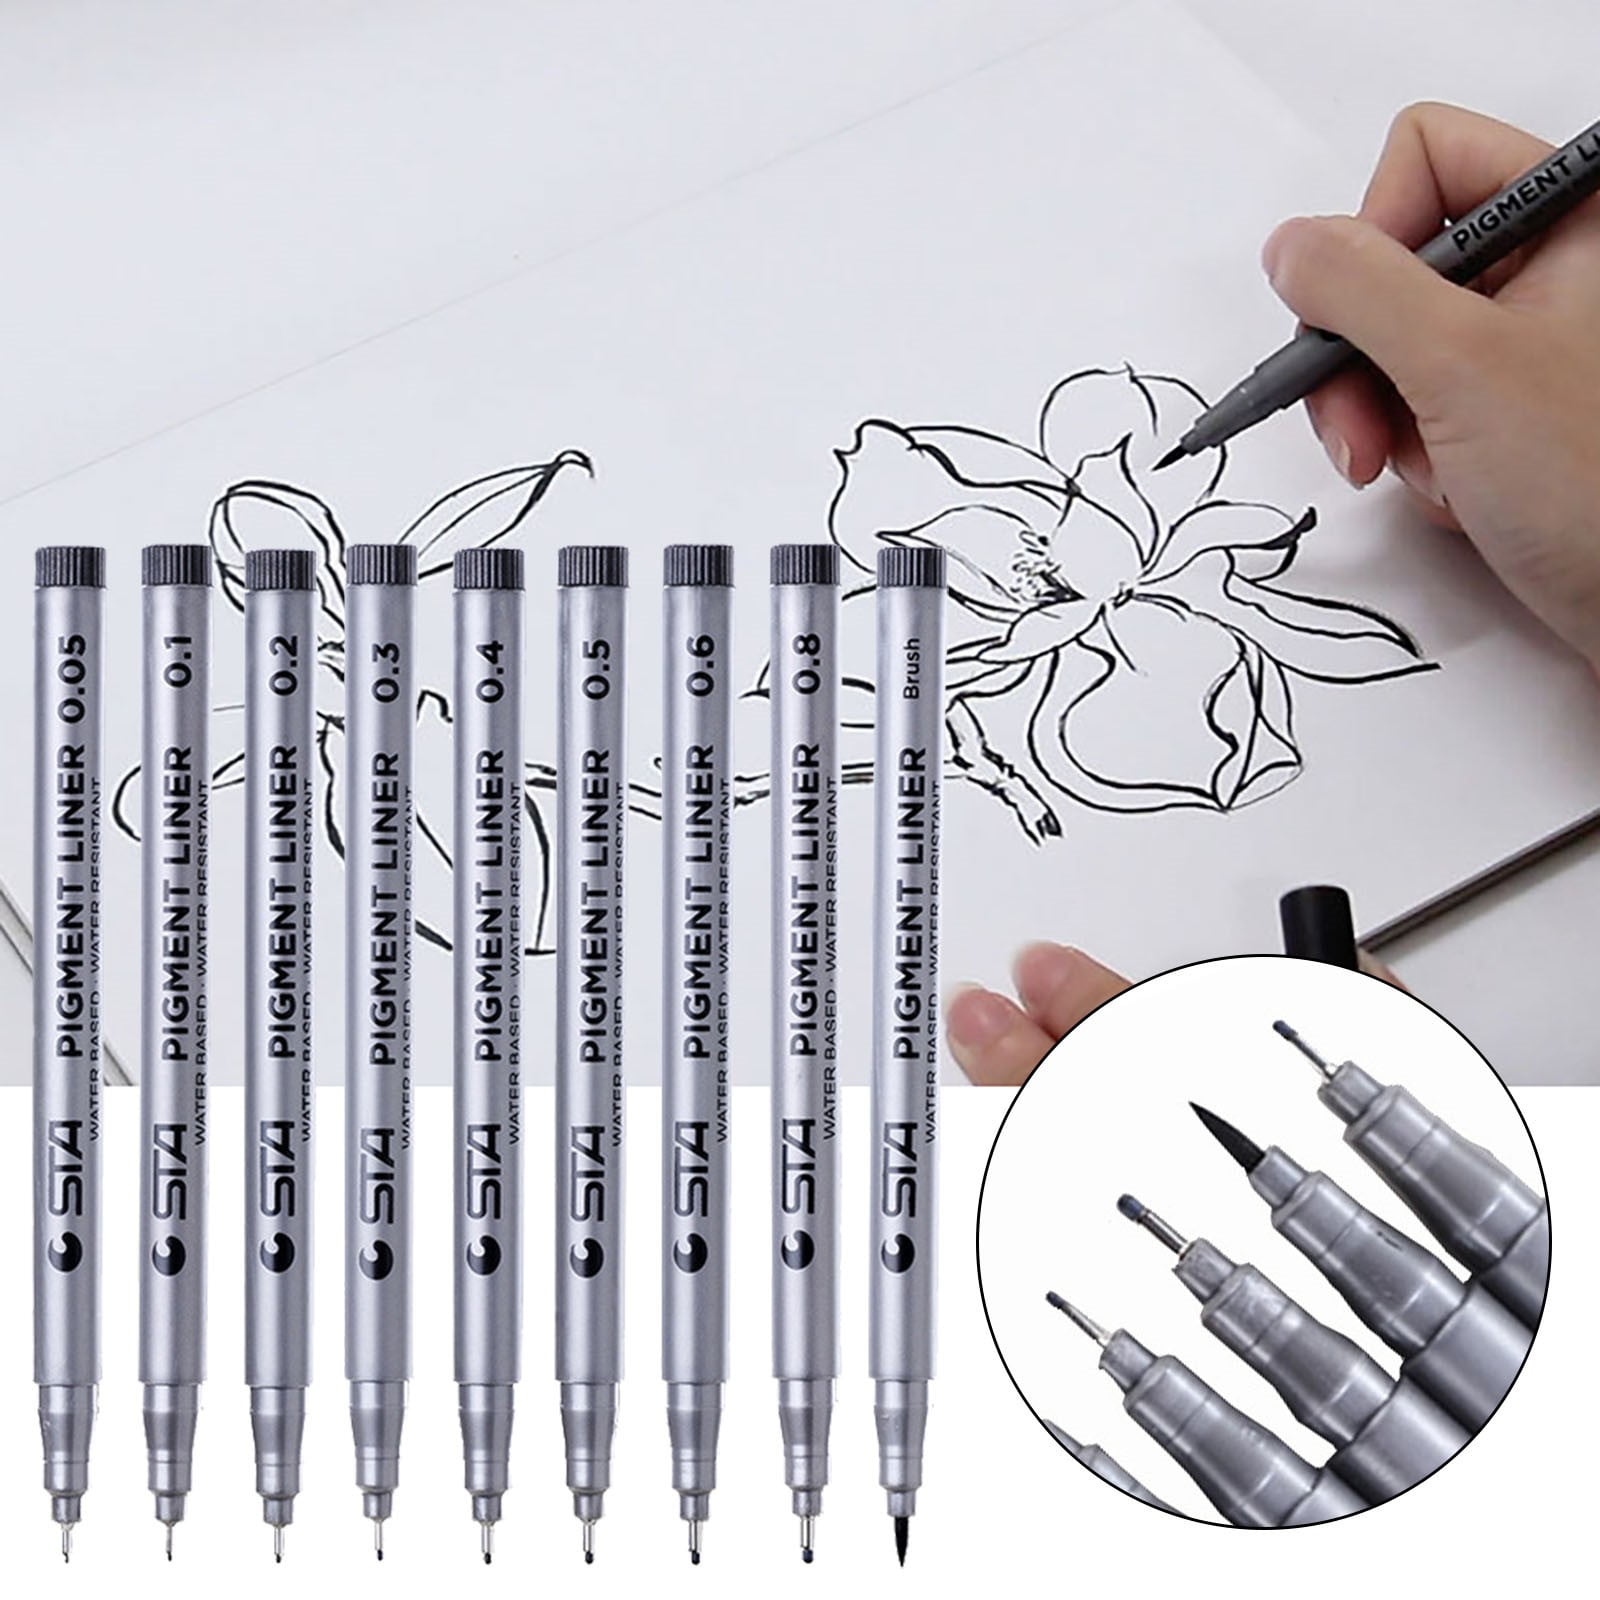 Drawing Pens for Artists - Guide